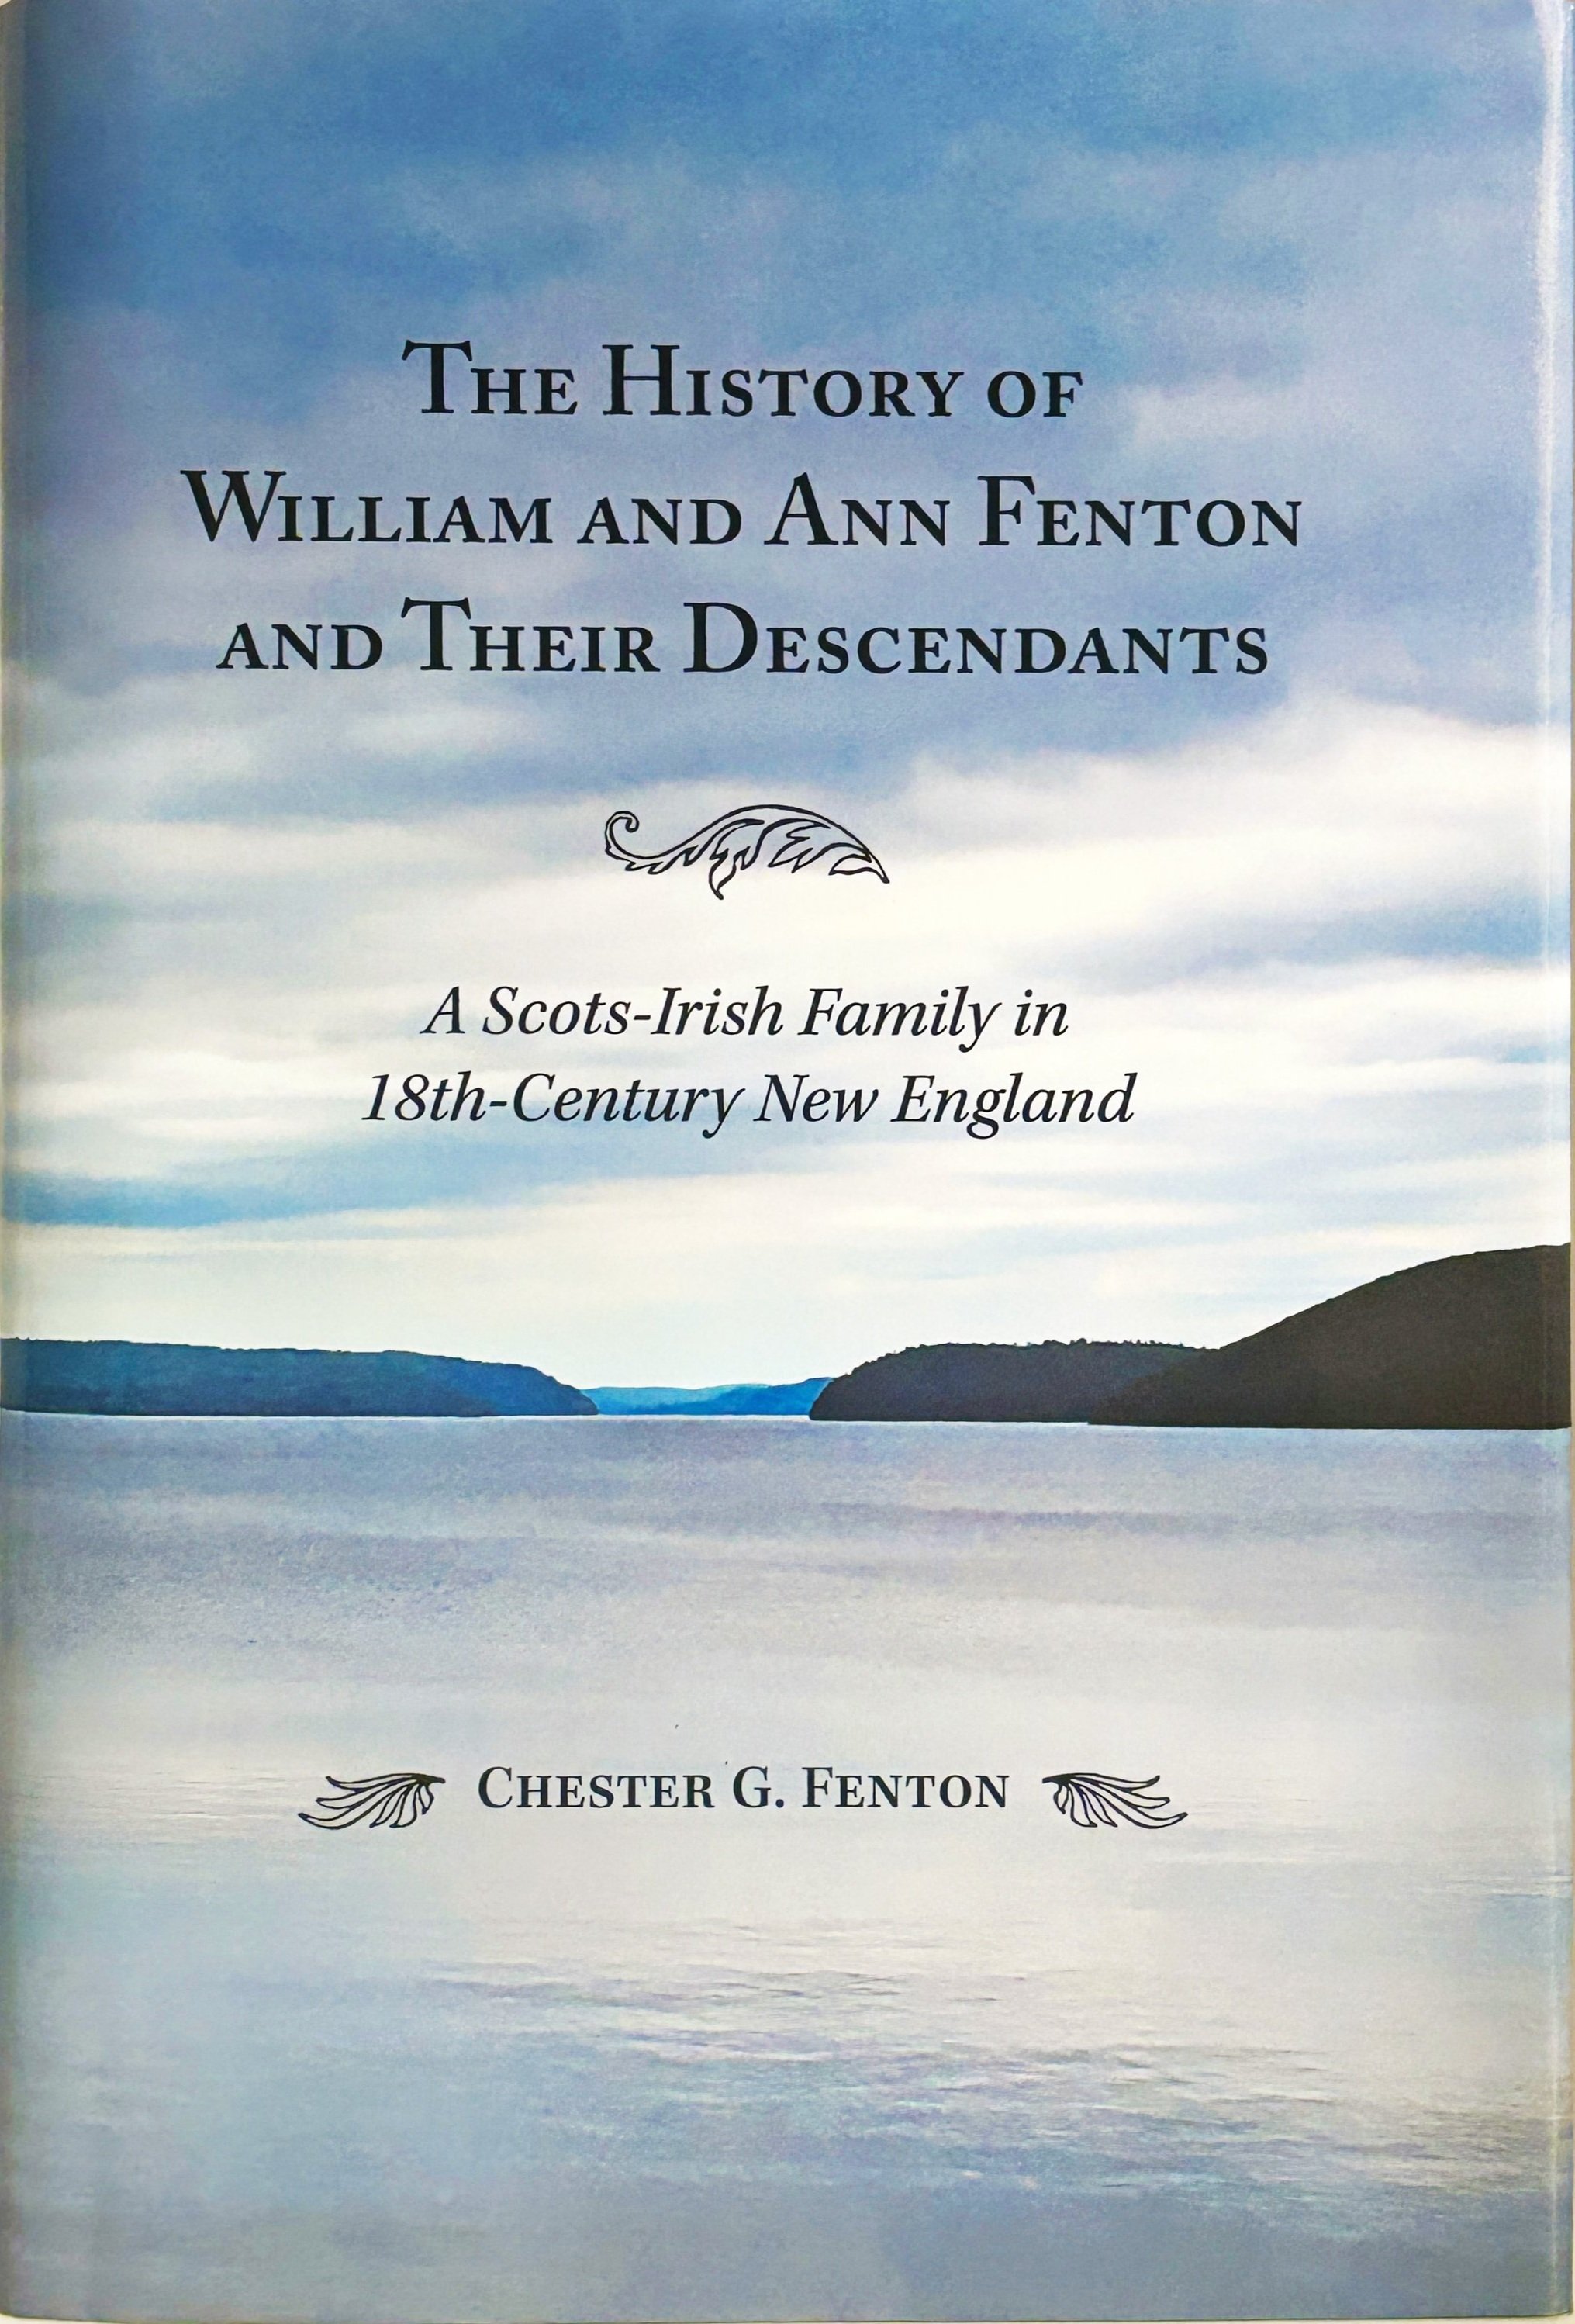 The History of William and Ann Fenton and Their Descendants (2018)